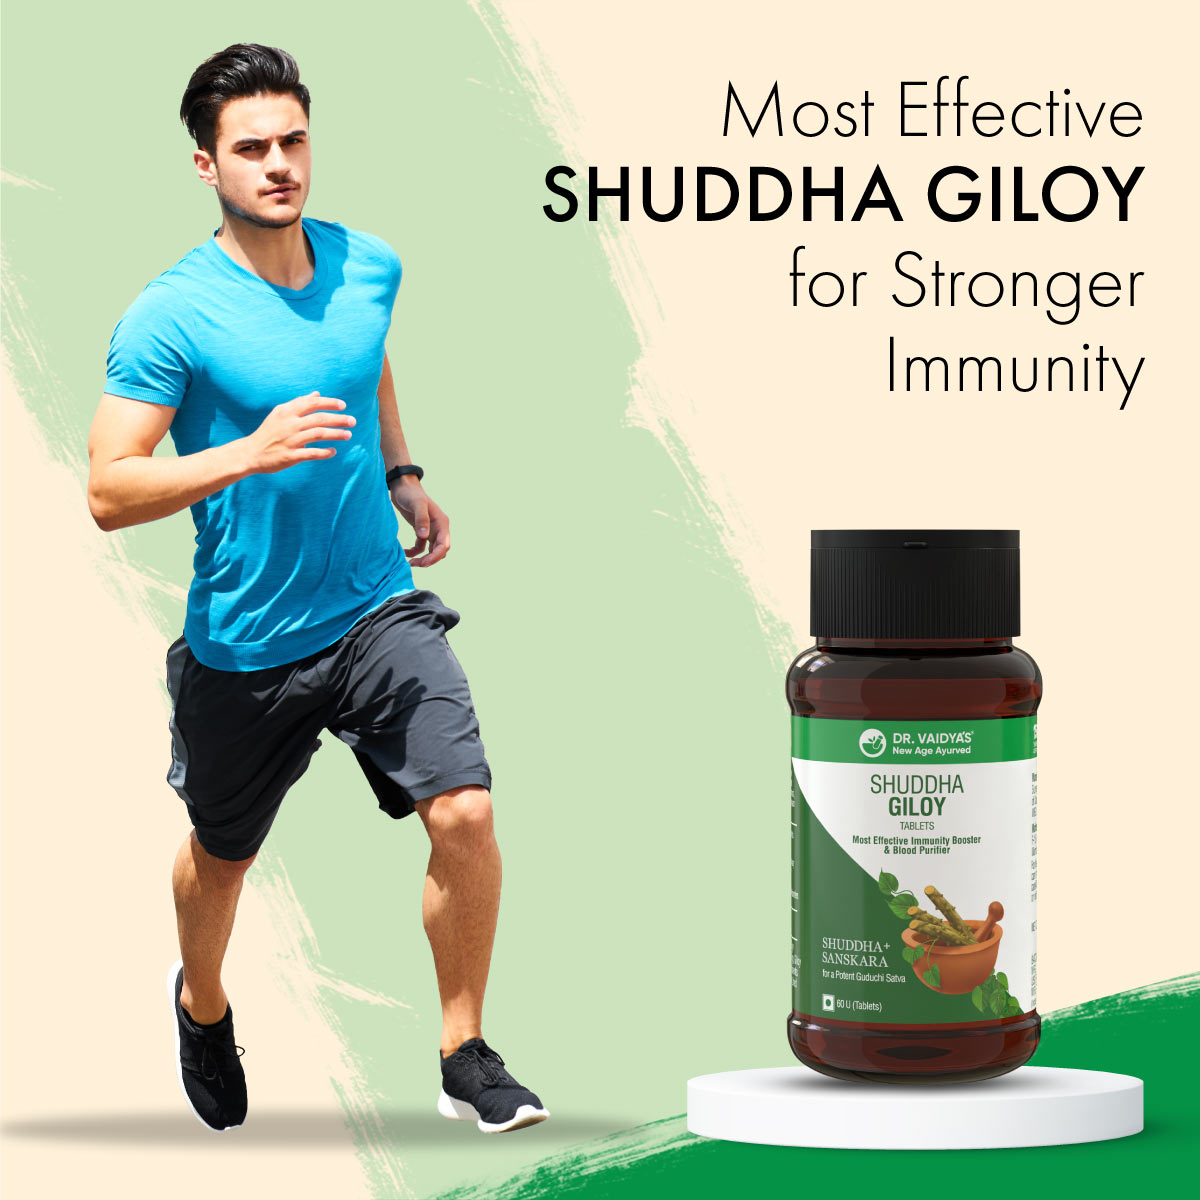 Shuddha Giloy Tablets: Most Effective Immunity Booster & Blood Purifier